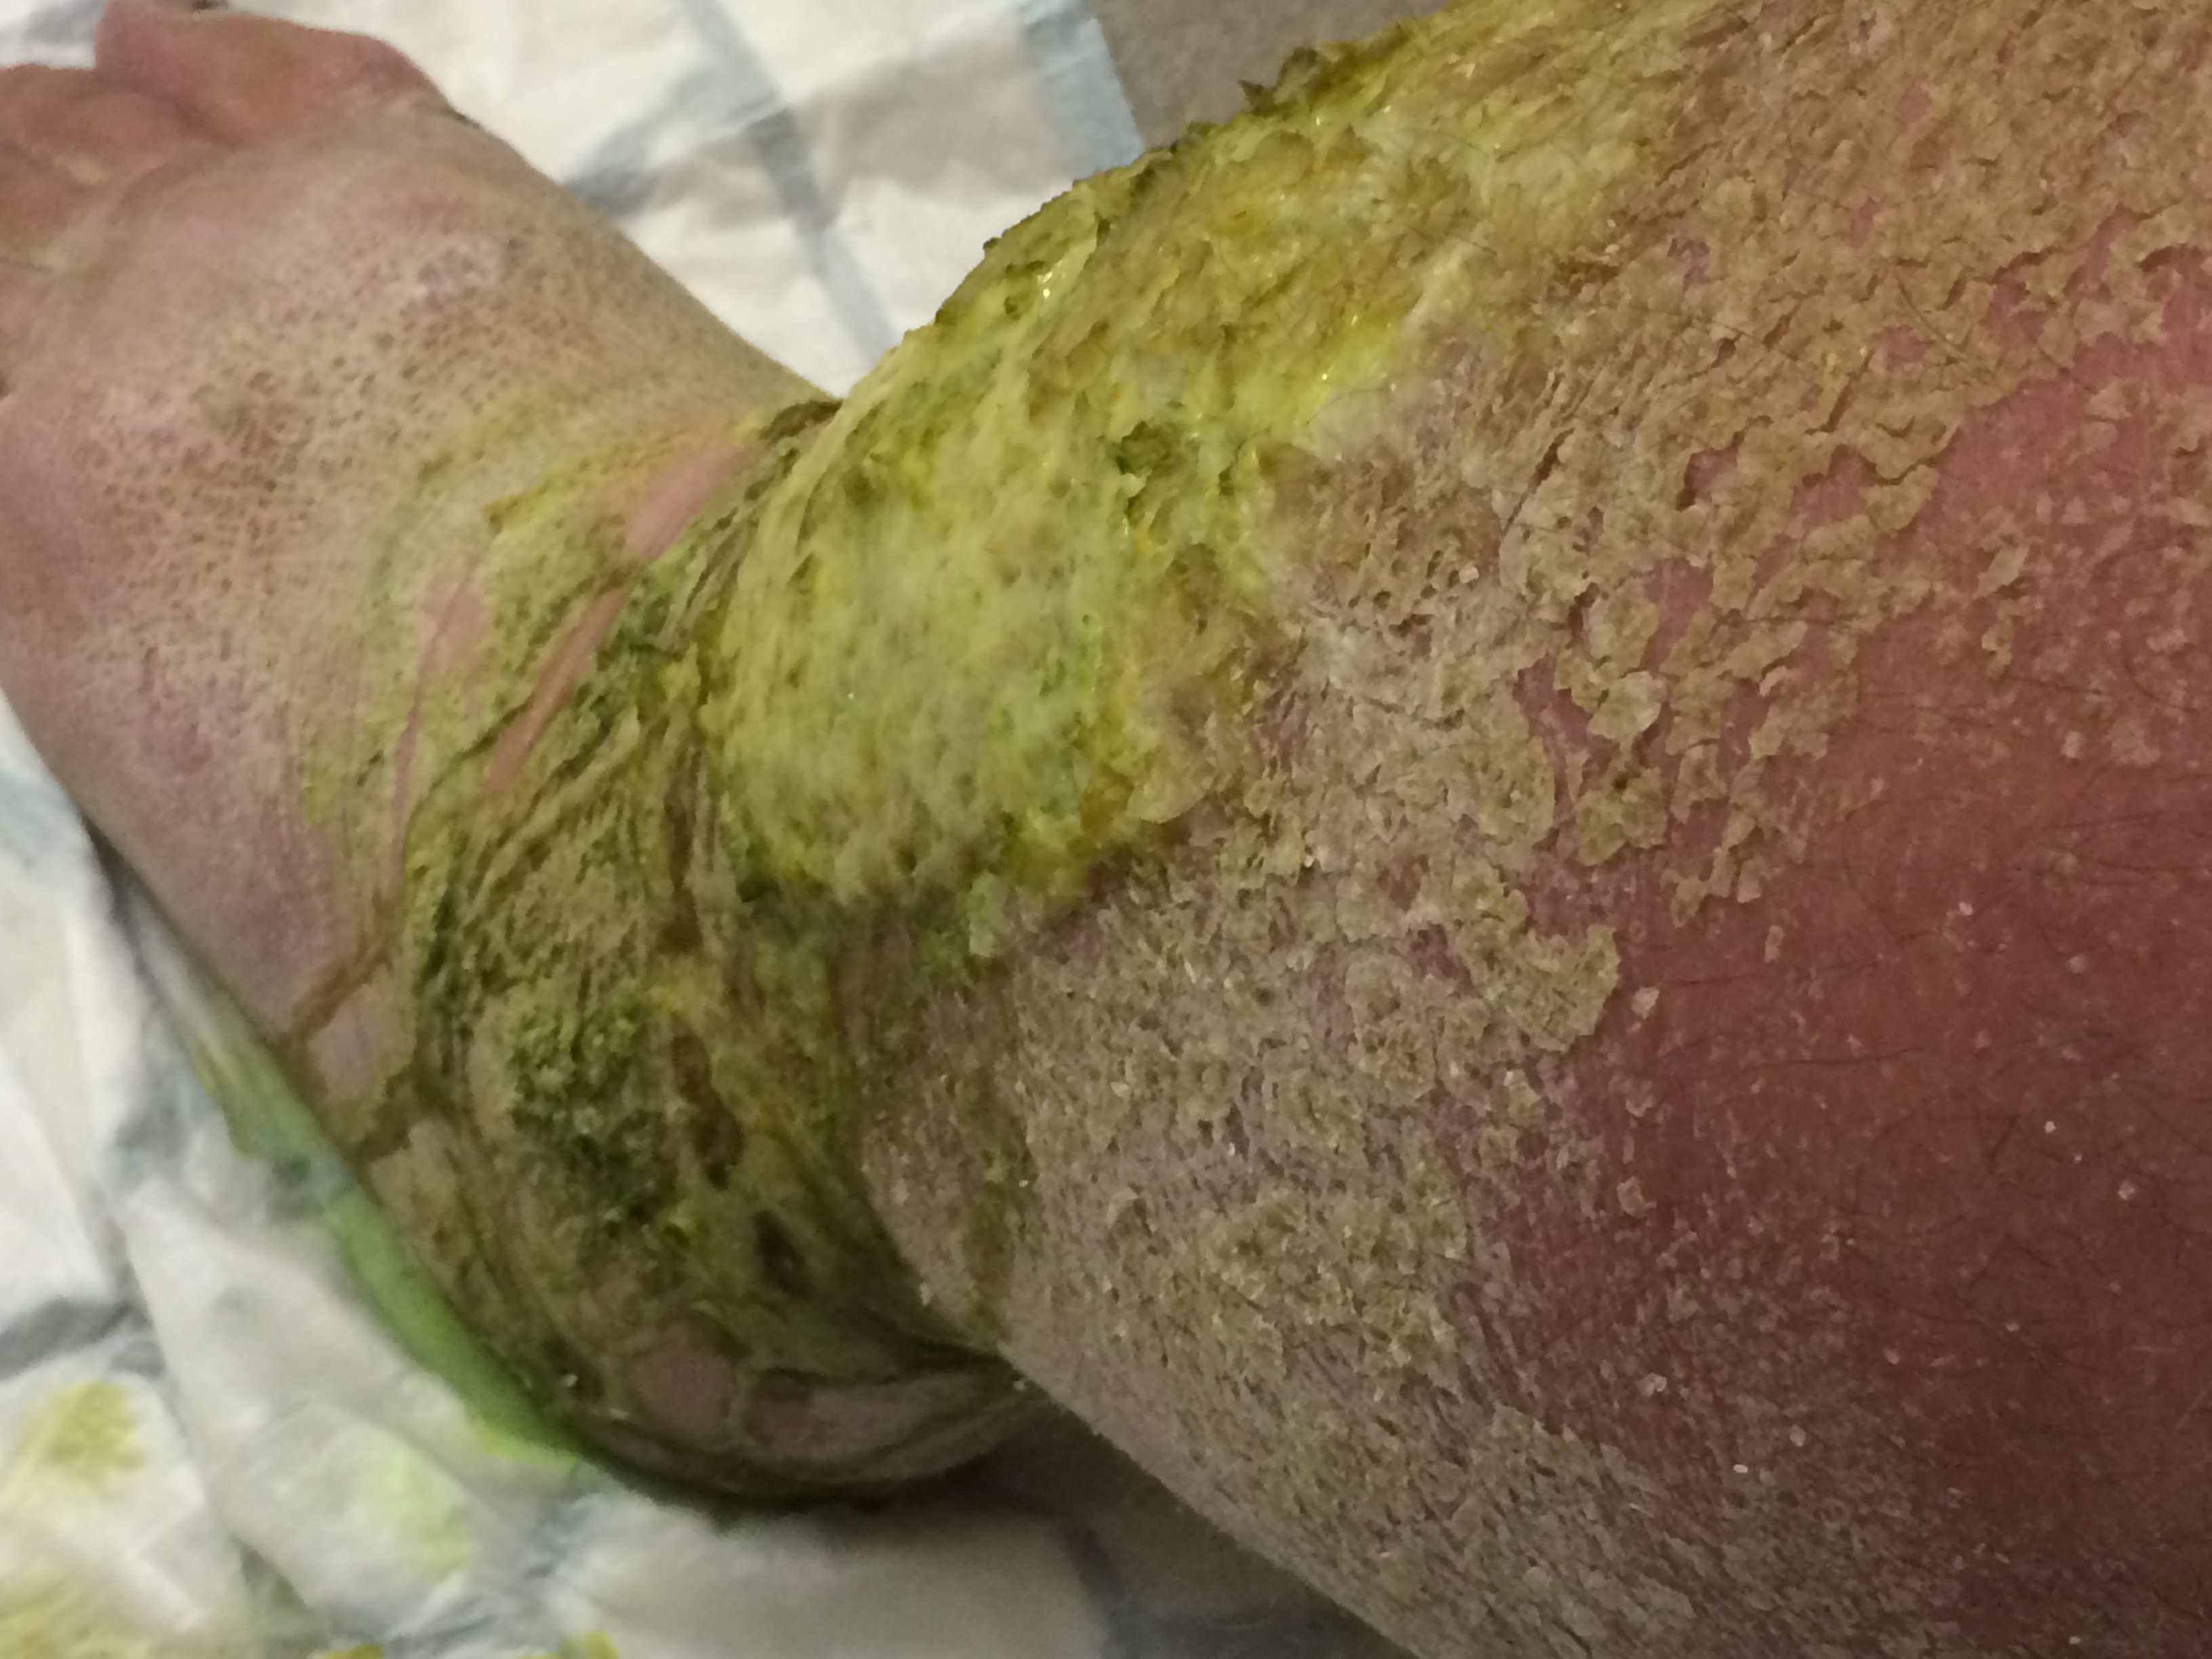 Left Leg close side view 15 December 2014 - 2 hours before Above Knee Amputation surgery at Manchester Royal Infirmary. very dry, cracked, stretched & flaky skin at front, side & back of leg and foot. Green grass-like colour of the wet area weeping down towards the foot causing chapped fold of the ankle both front and back.Hair growth, colour changes and the leg was extremely hot to go near. Allodynia in all areas of the leg was present as was extreme oedema (edema in US English) (swelling.)